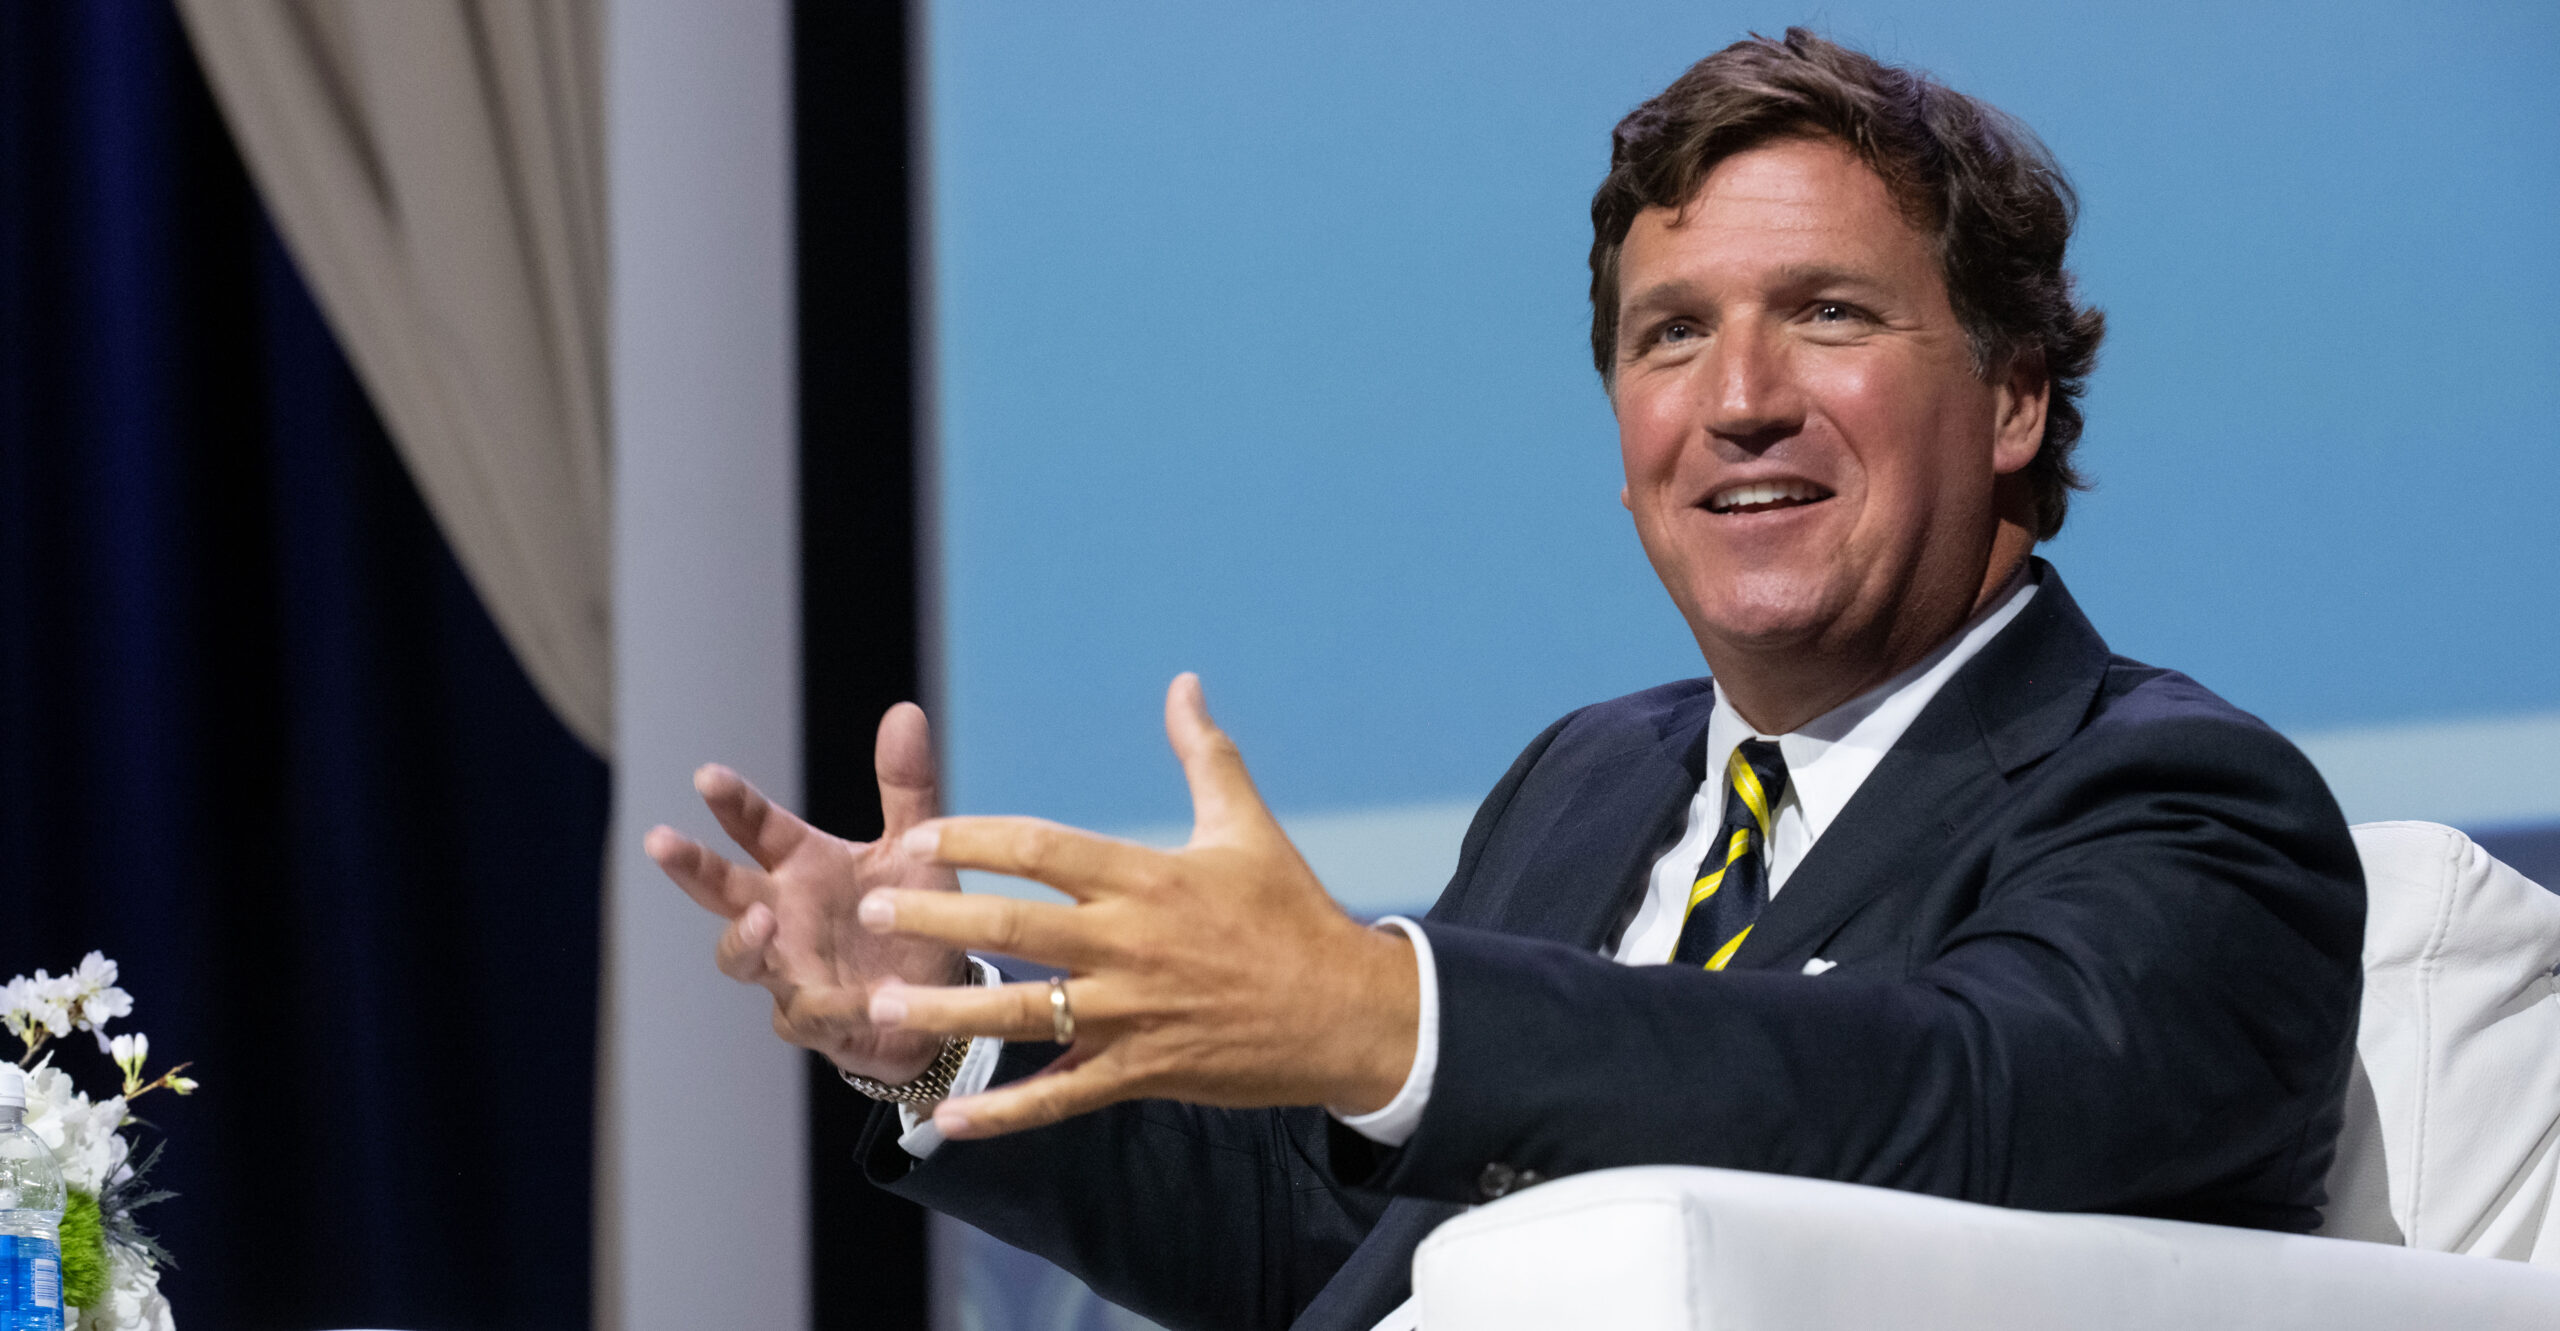 More Americans Need to Stand Up to the Left's Insanity, Tucker Carlson Says at Heritage Foundation Gala